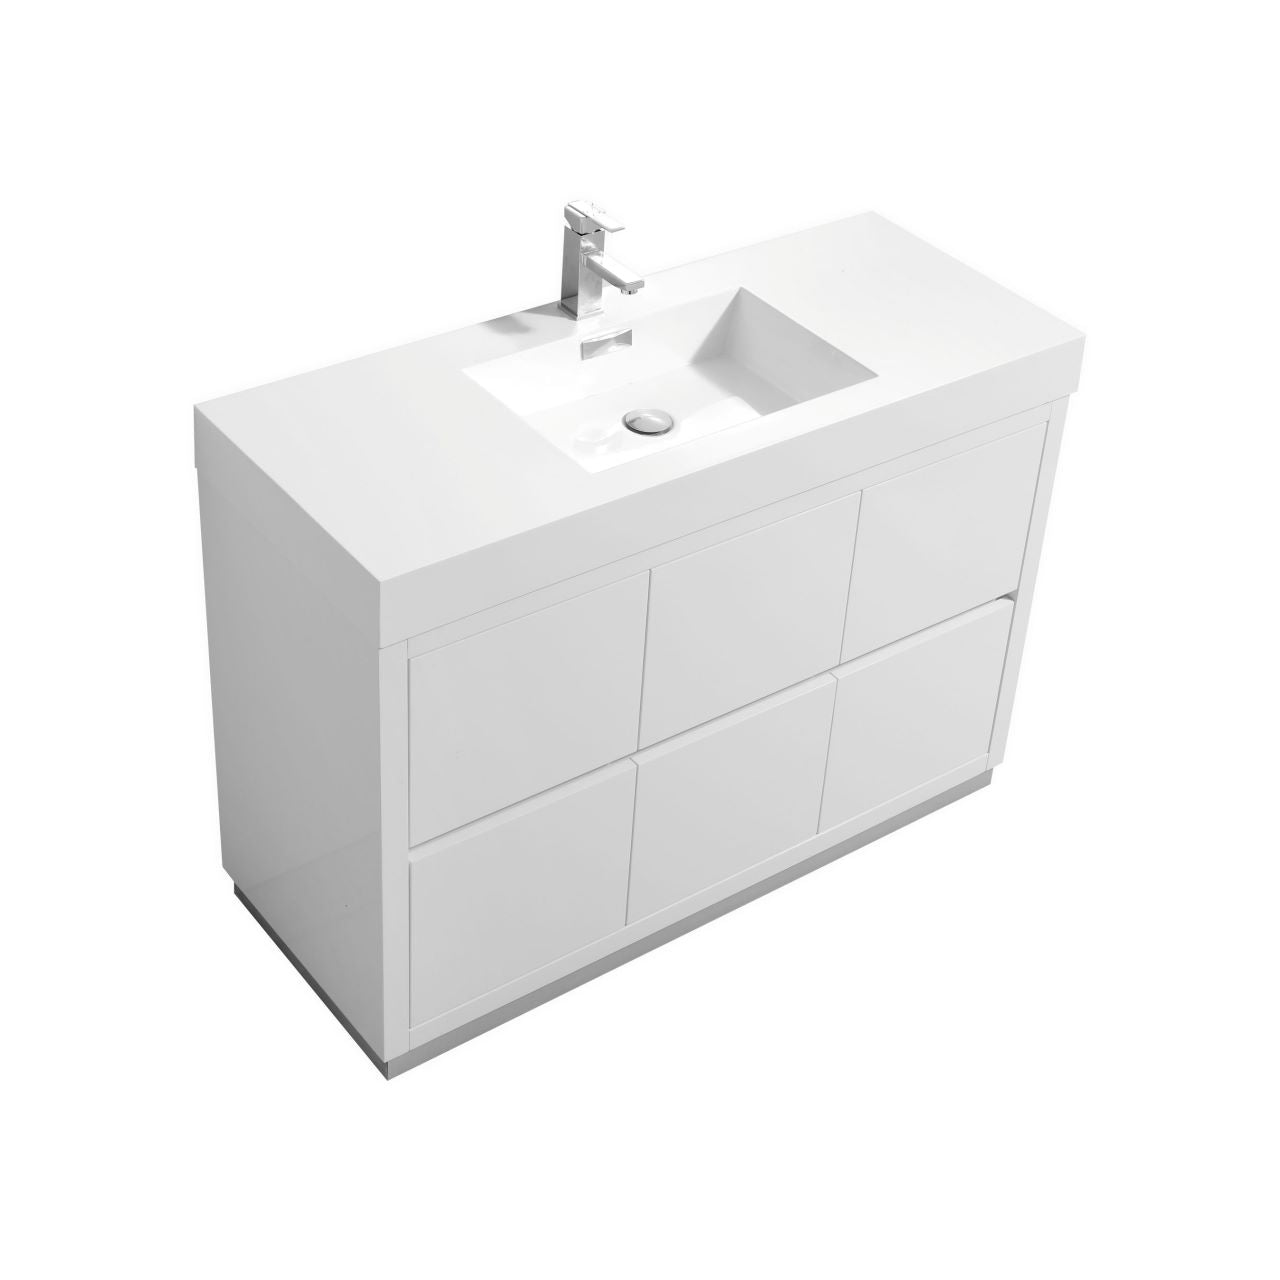 KUBEBATH Bliss FMB48-GW 48" Single Bathroom Vanity in High Gloss White with White Acrylic Composite, Integrated Sink, Angled View